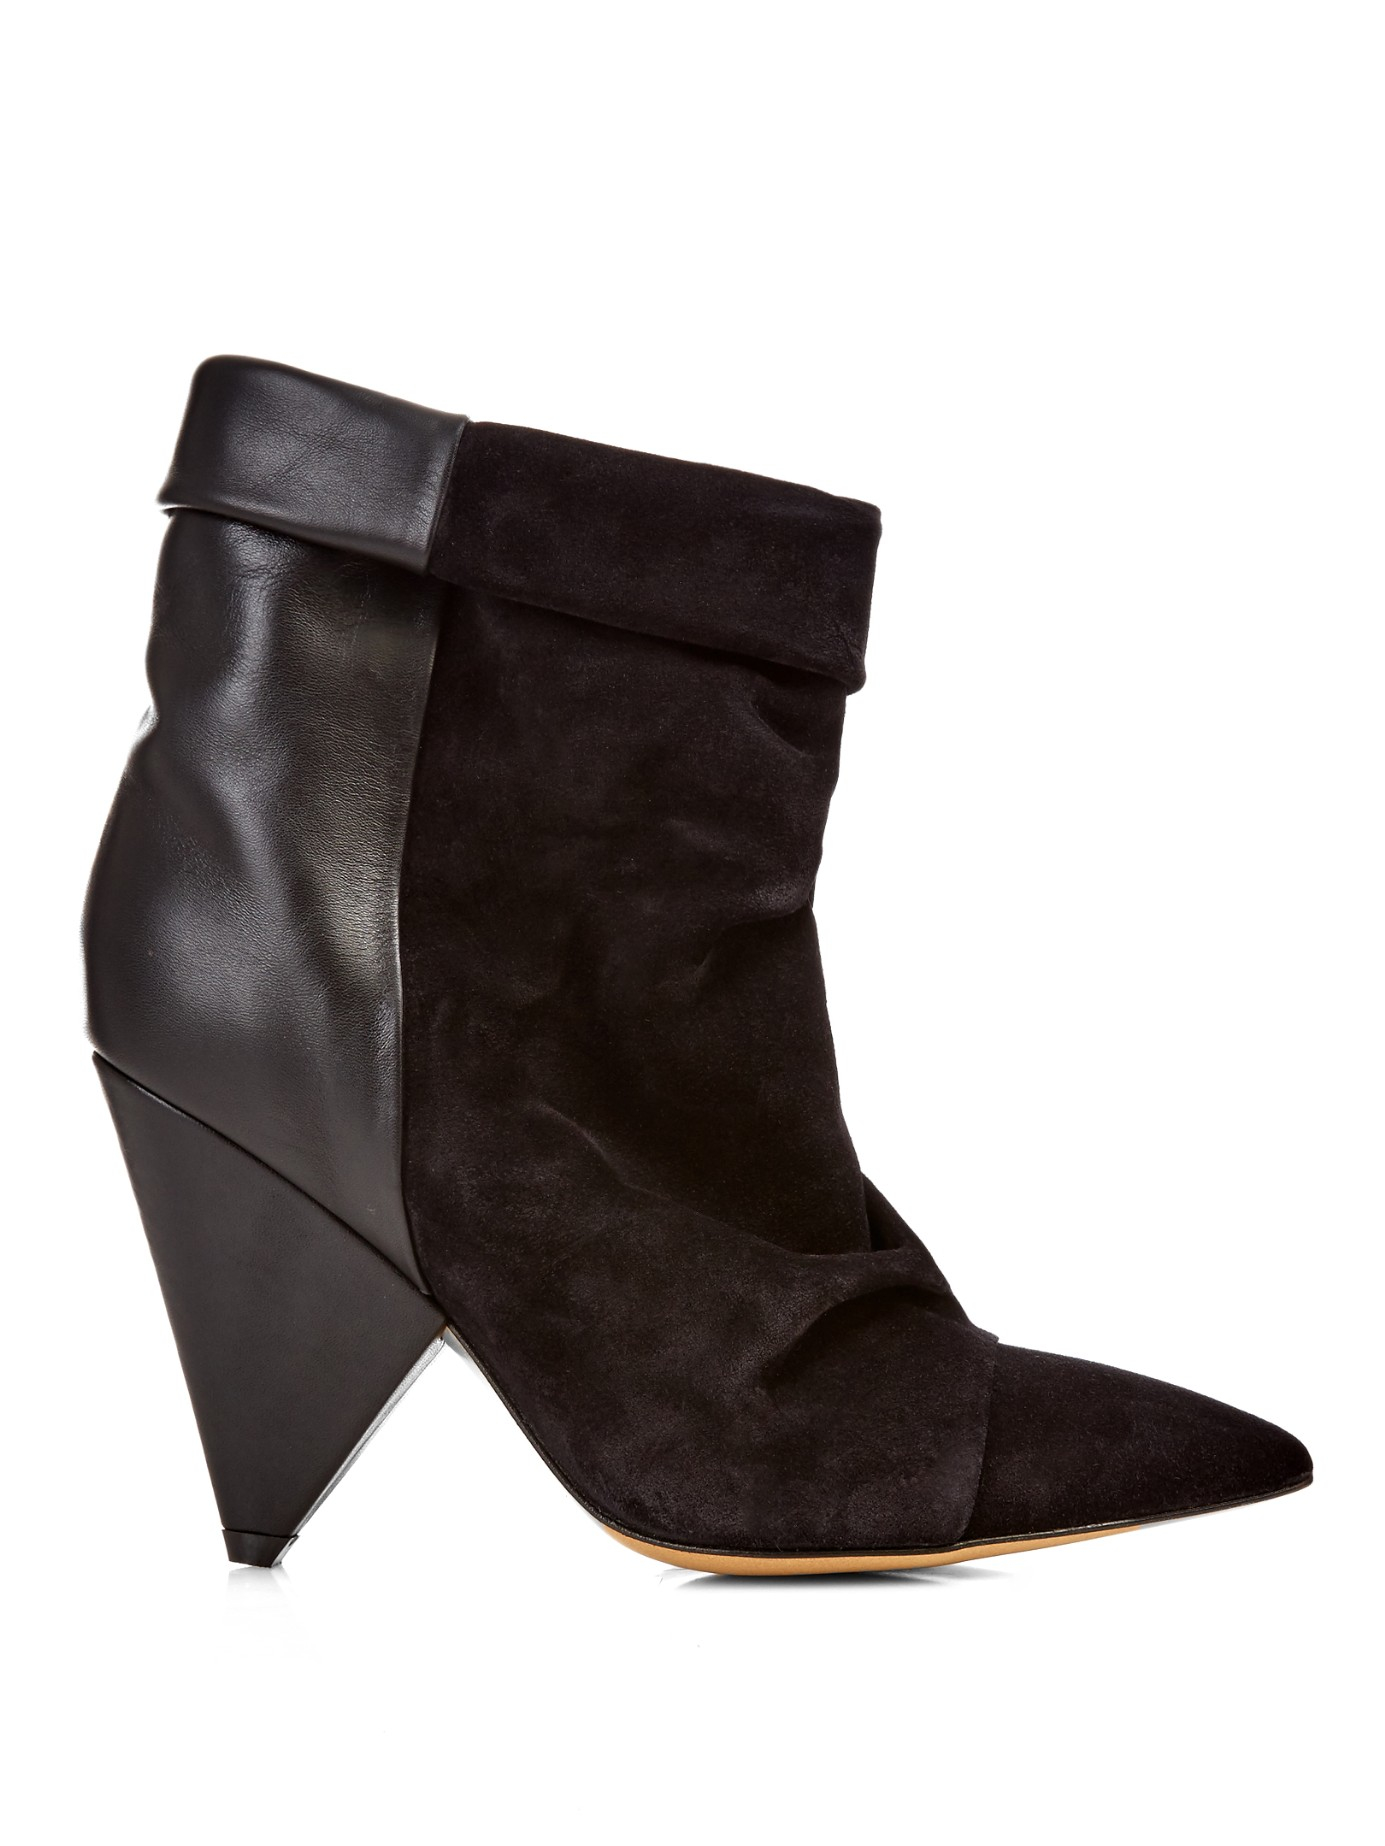 Isabel Marant Andrew Leather And Suede Ankle Boots in Black | Lyst